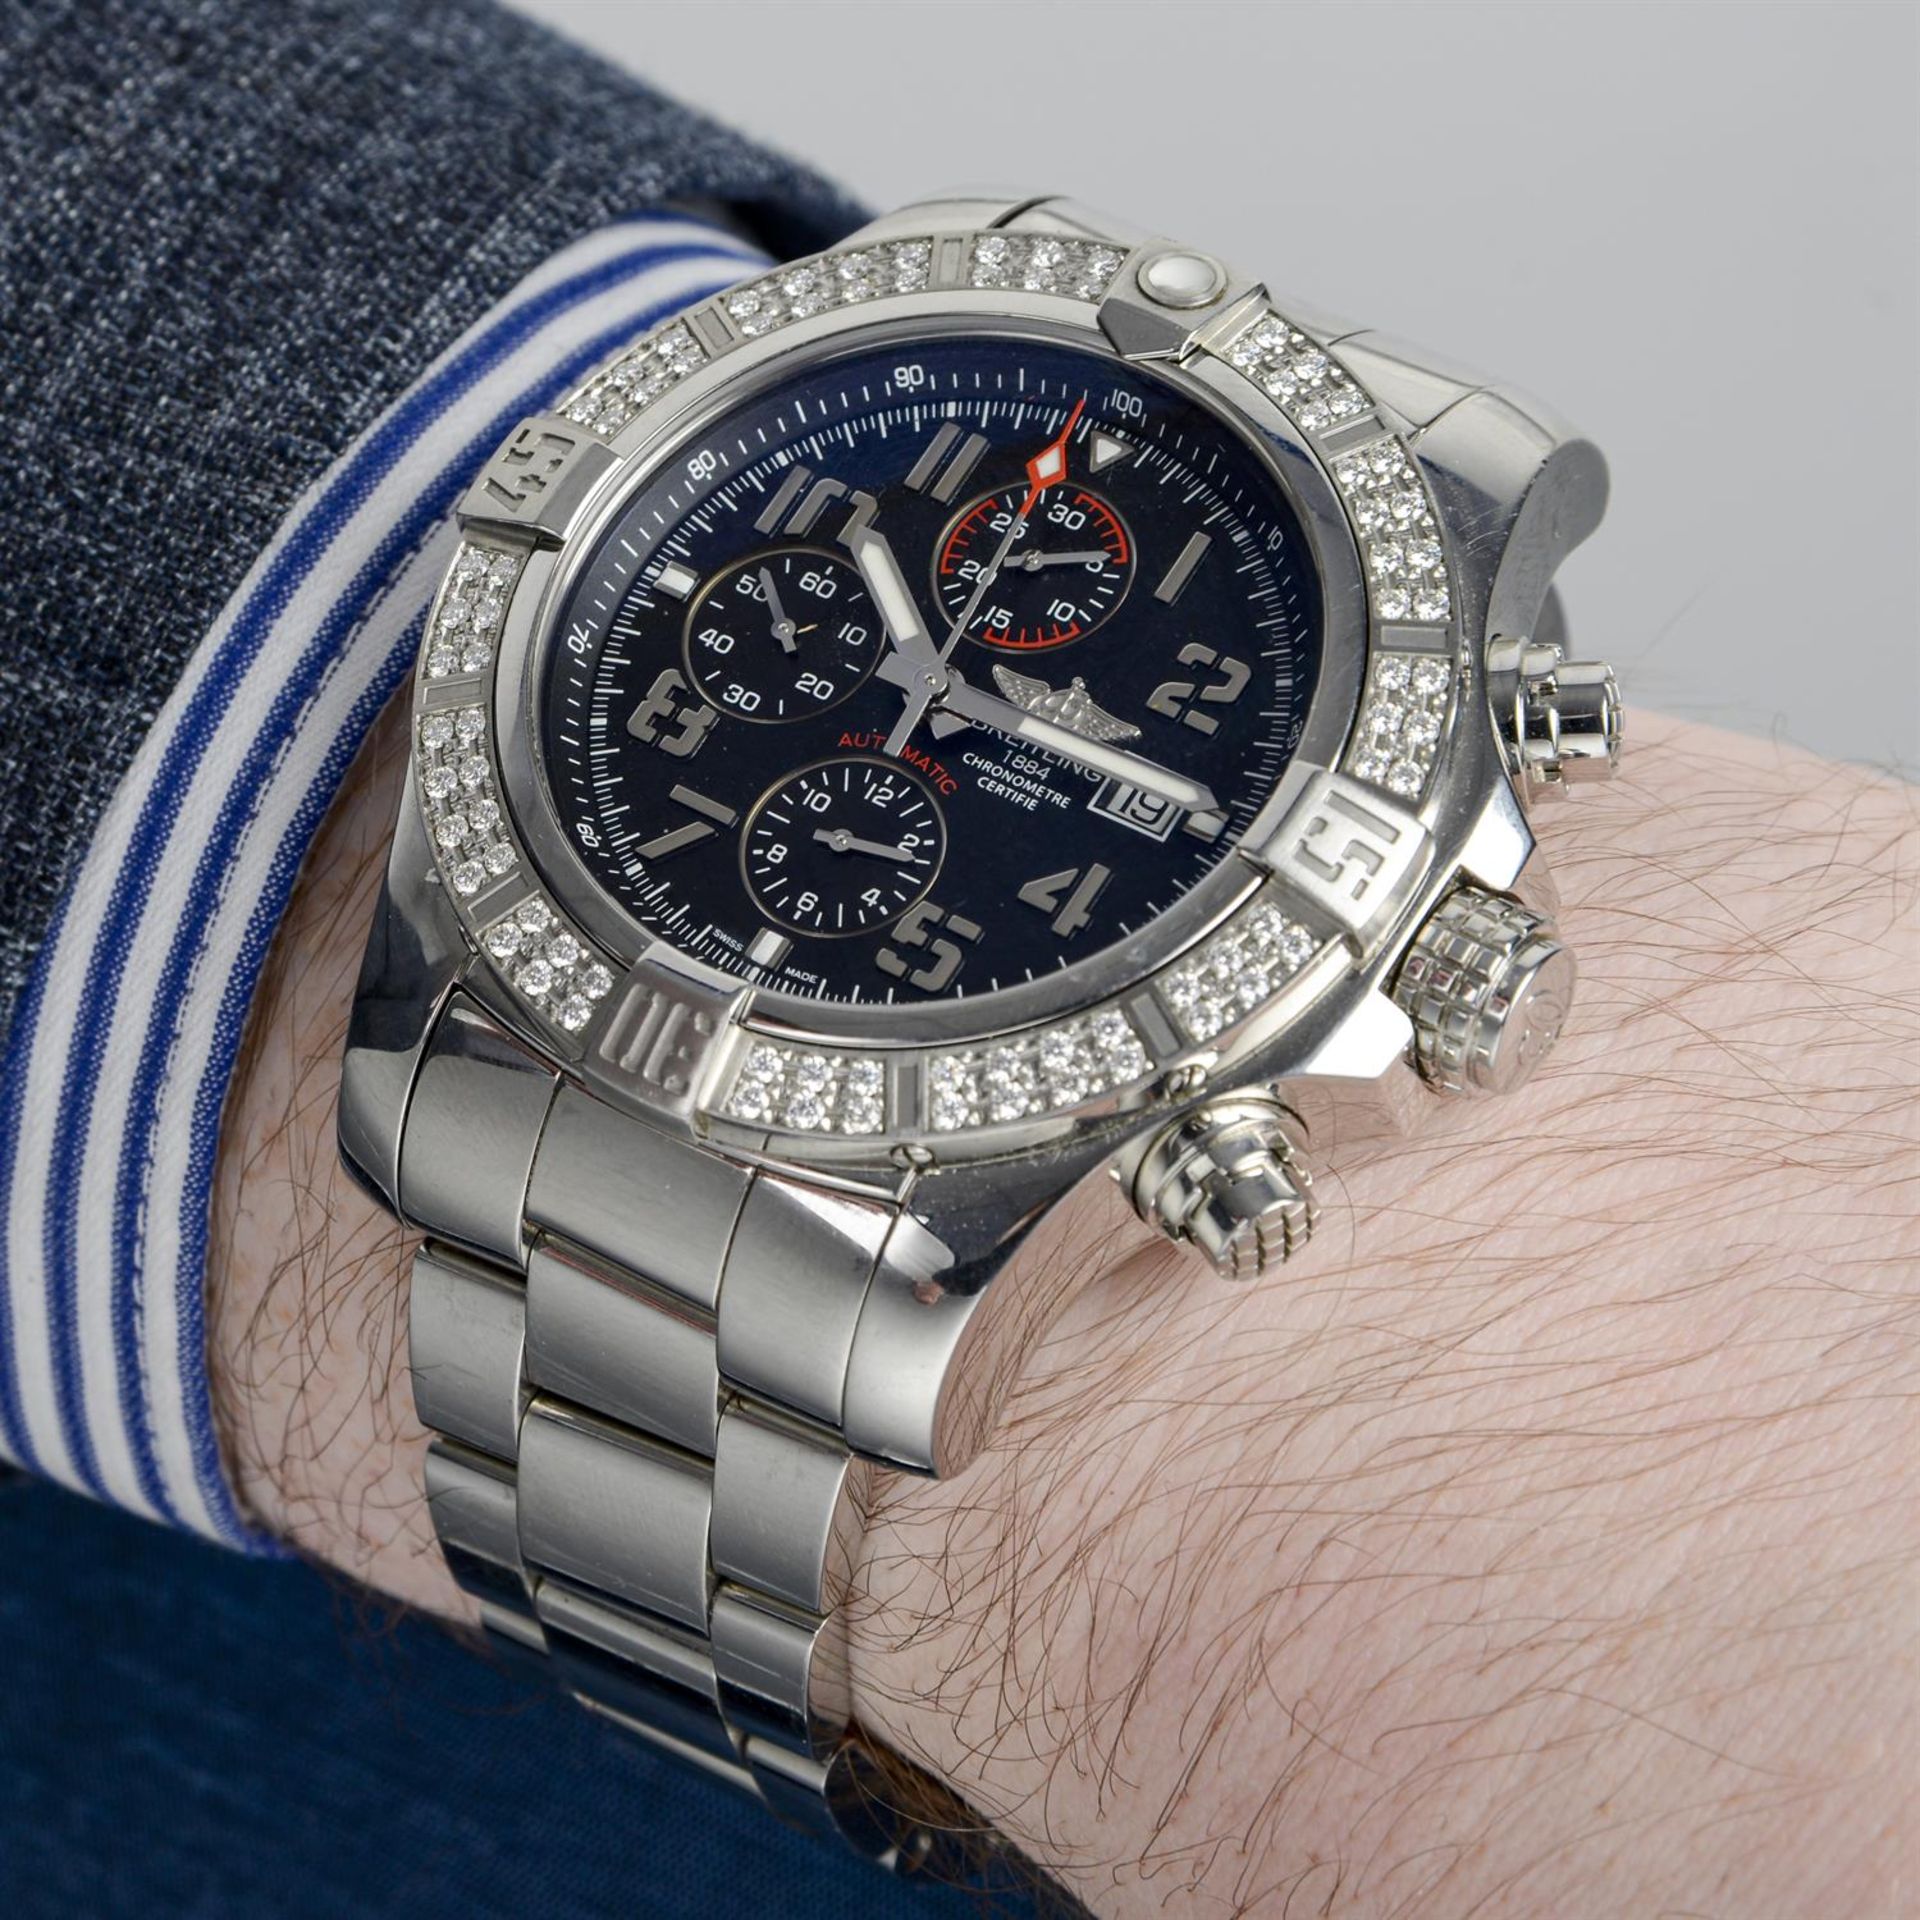 Breitling - a Super Avenger II chronograph watch, 48mm. - Image 6 of 7